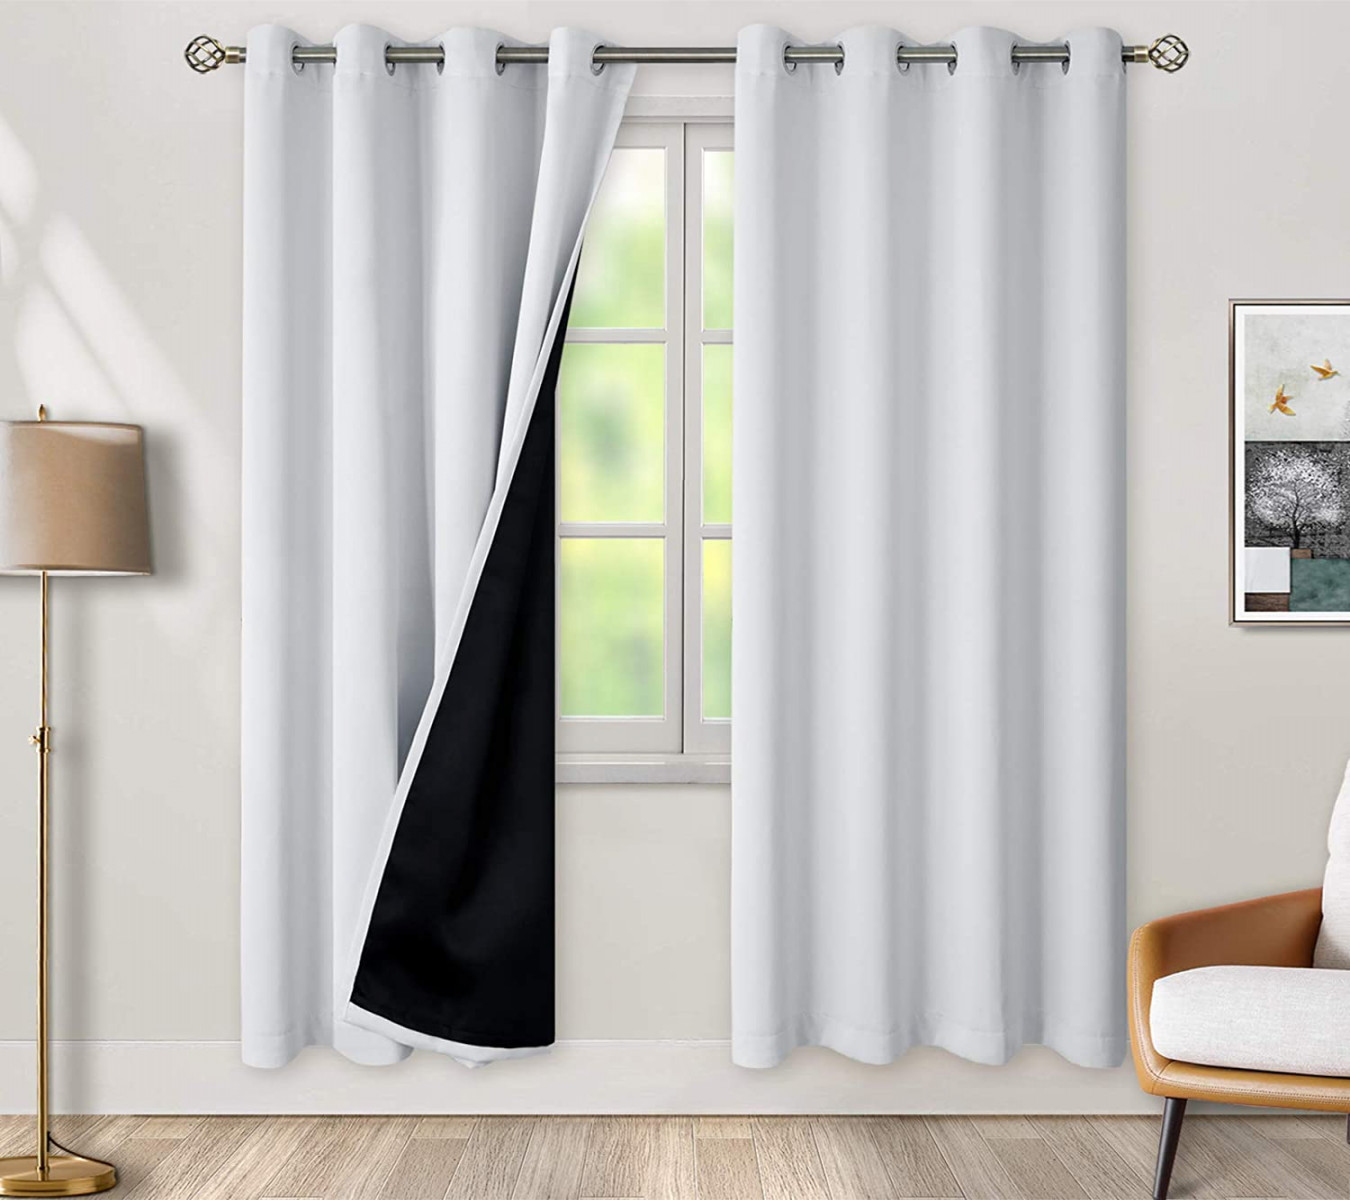 BGment Thermal Insulated % Blackout Curtains for Bedroom with Black  Lining, Double Layer Full Room Darkening Noise Reduction Eyelet Curtain  (x